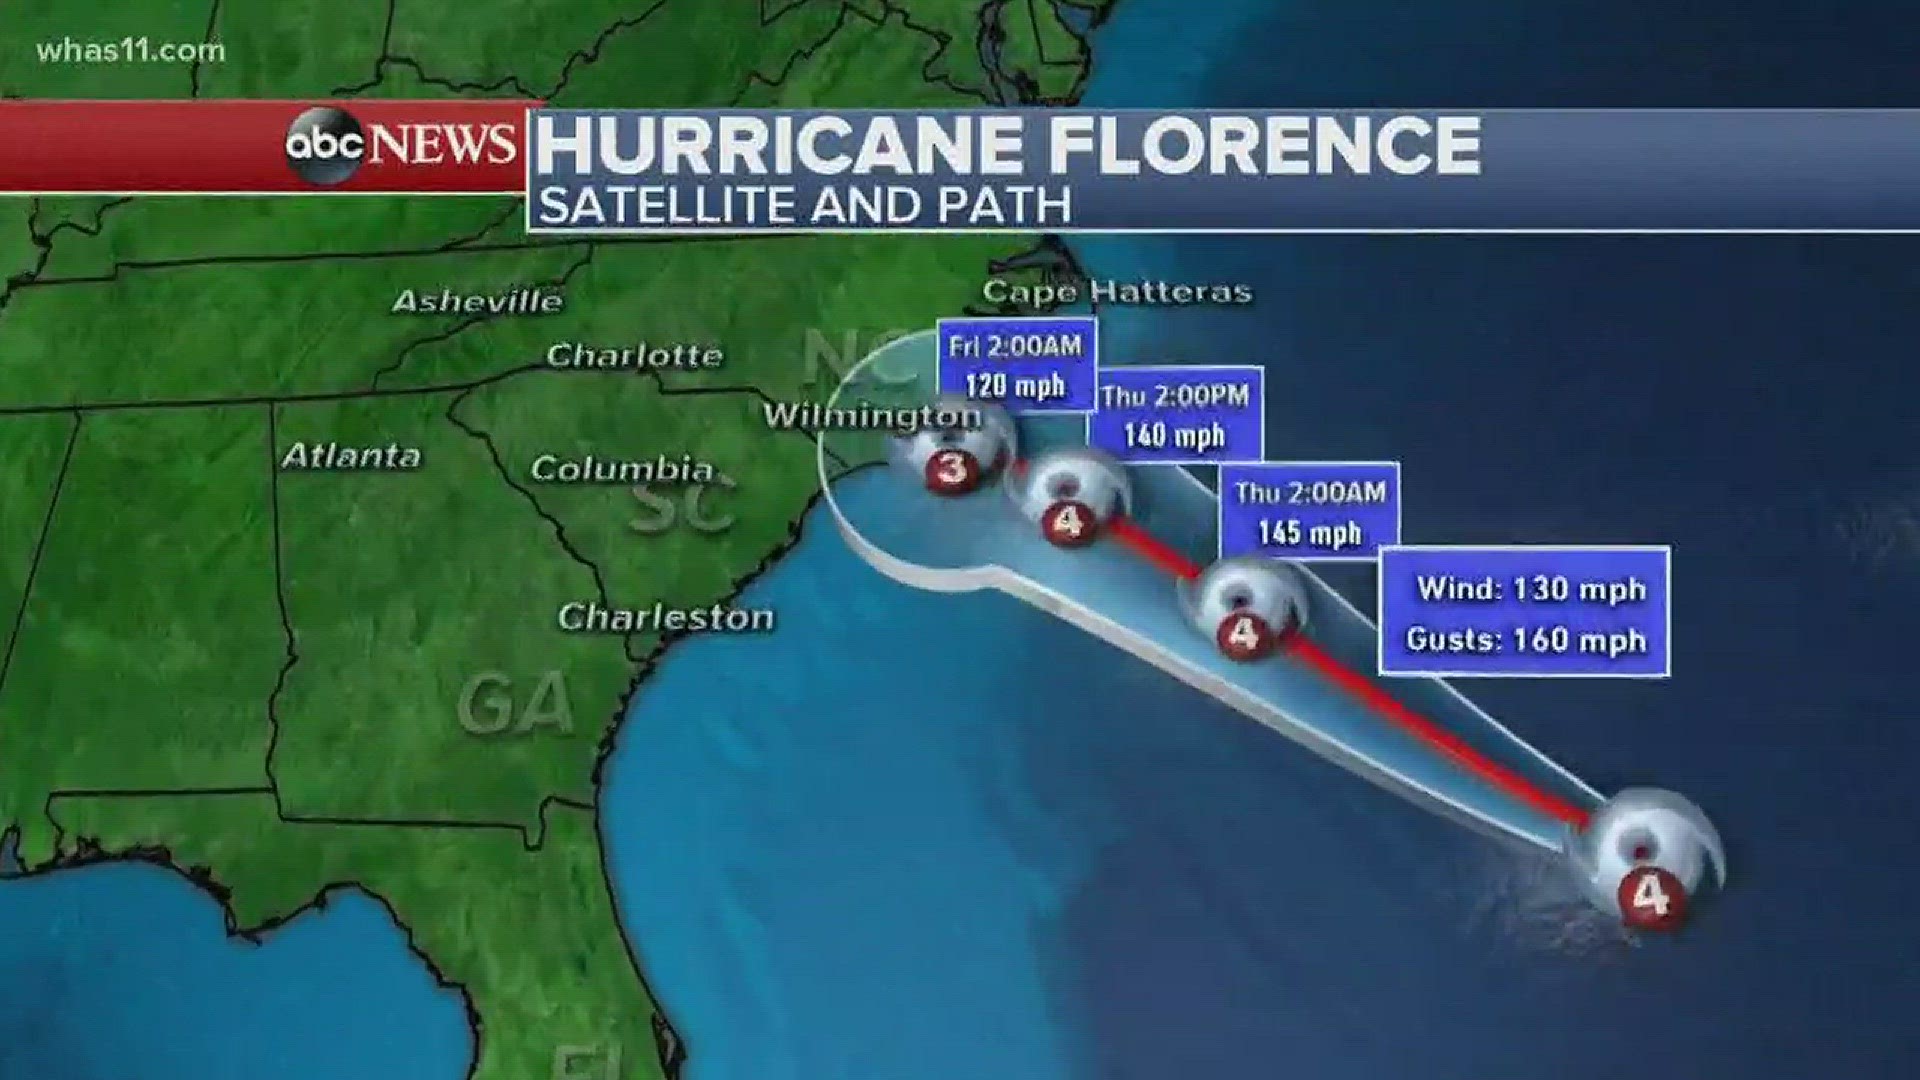 Hurricane Florence, a powerful category 4 storm, is moving closer to the Carolinas.